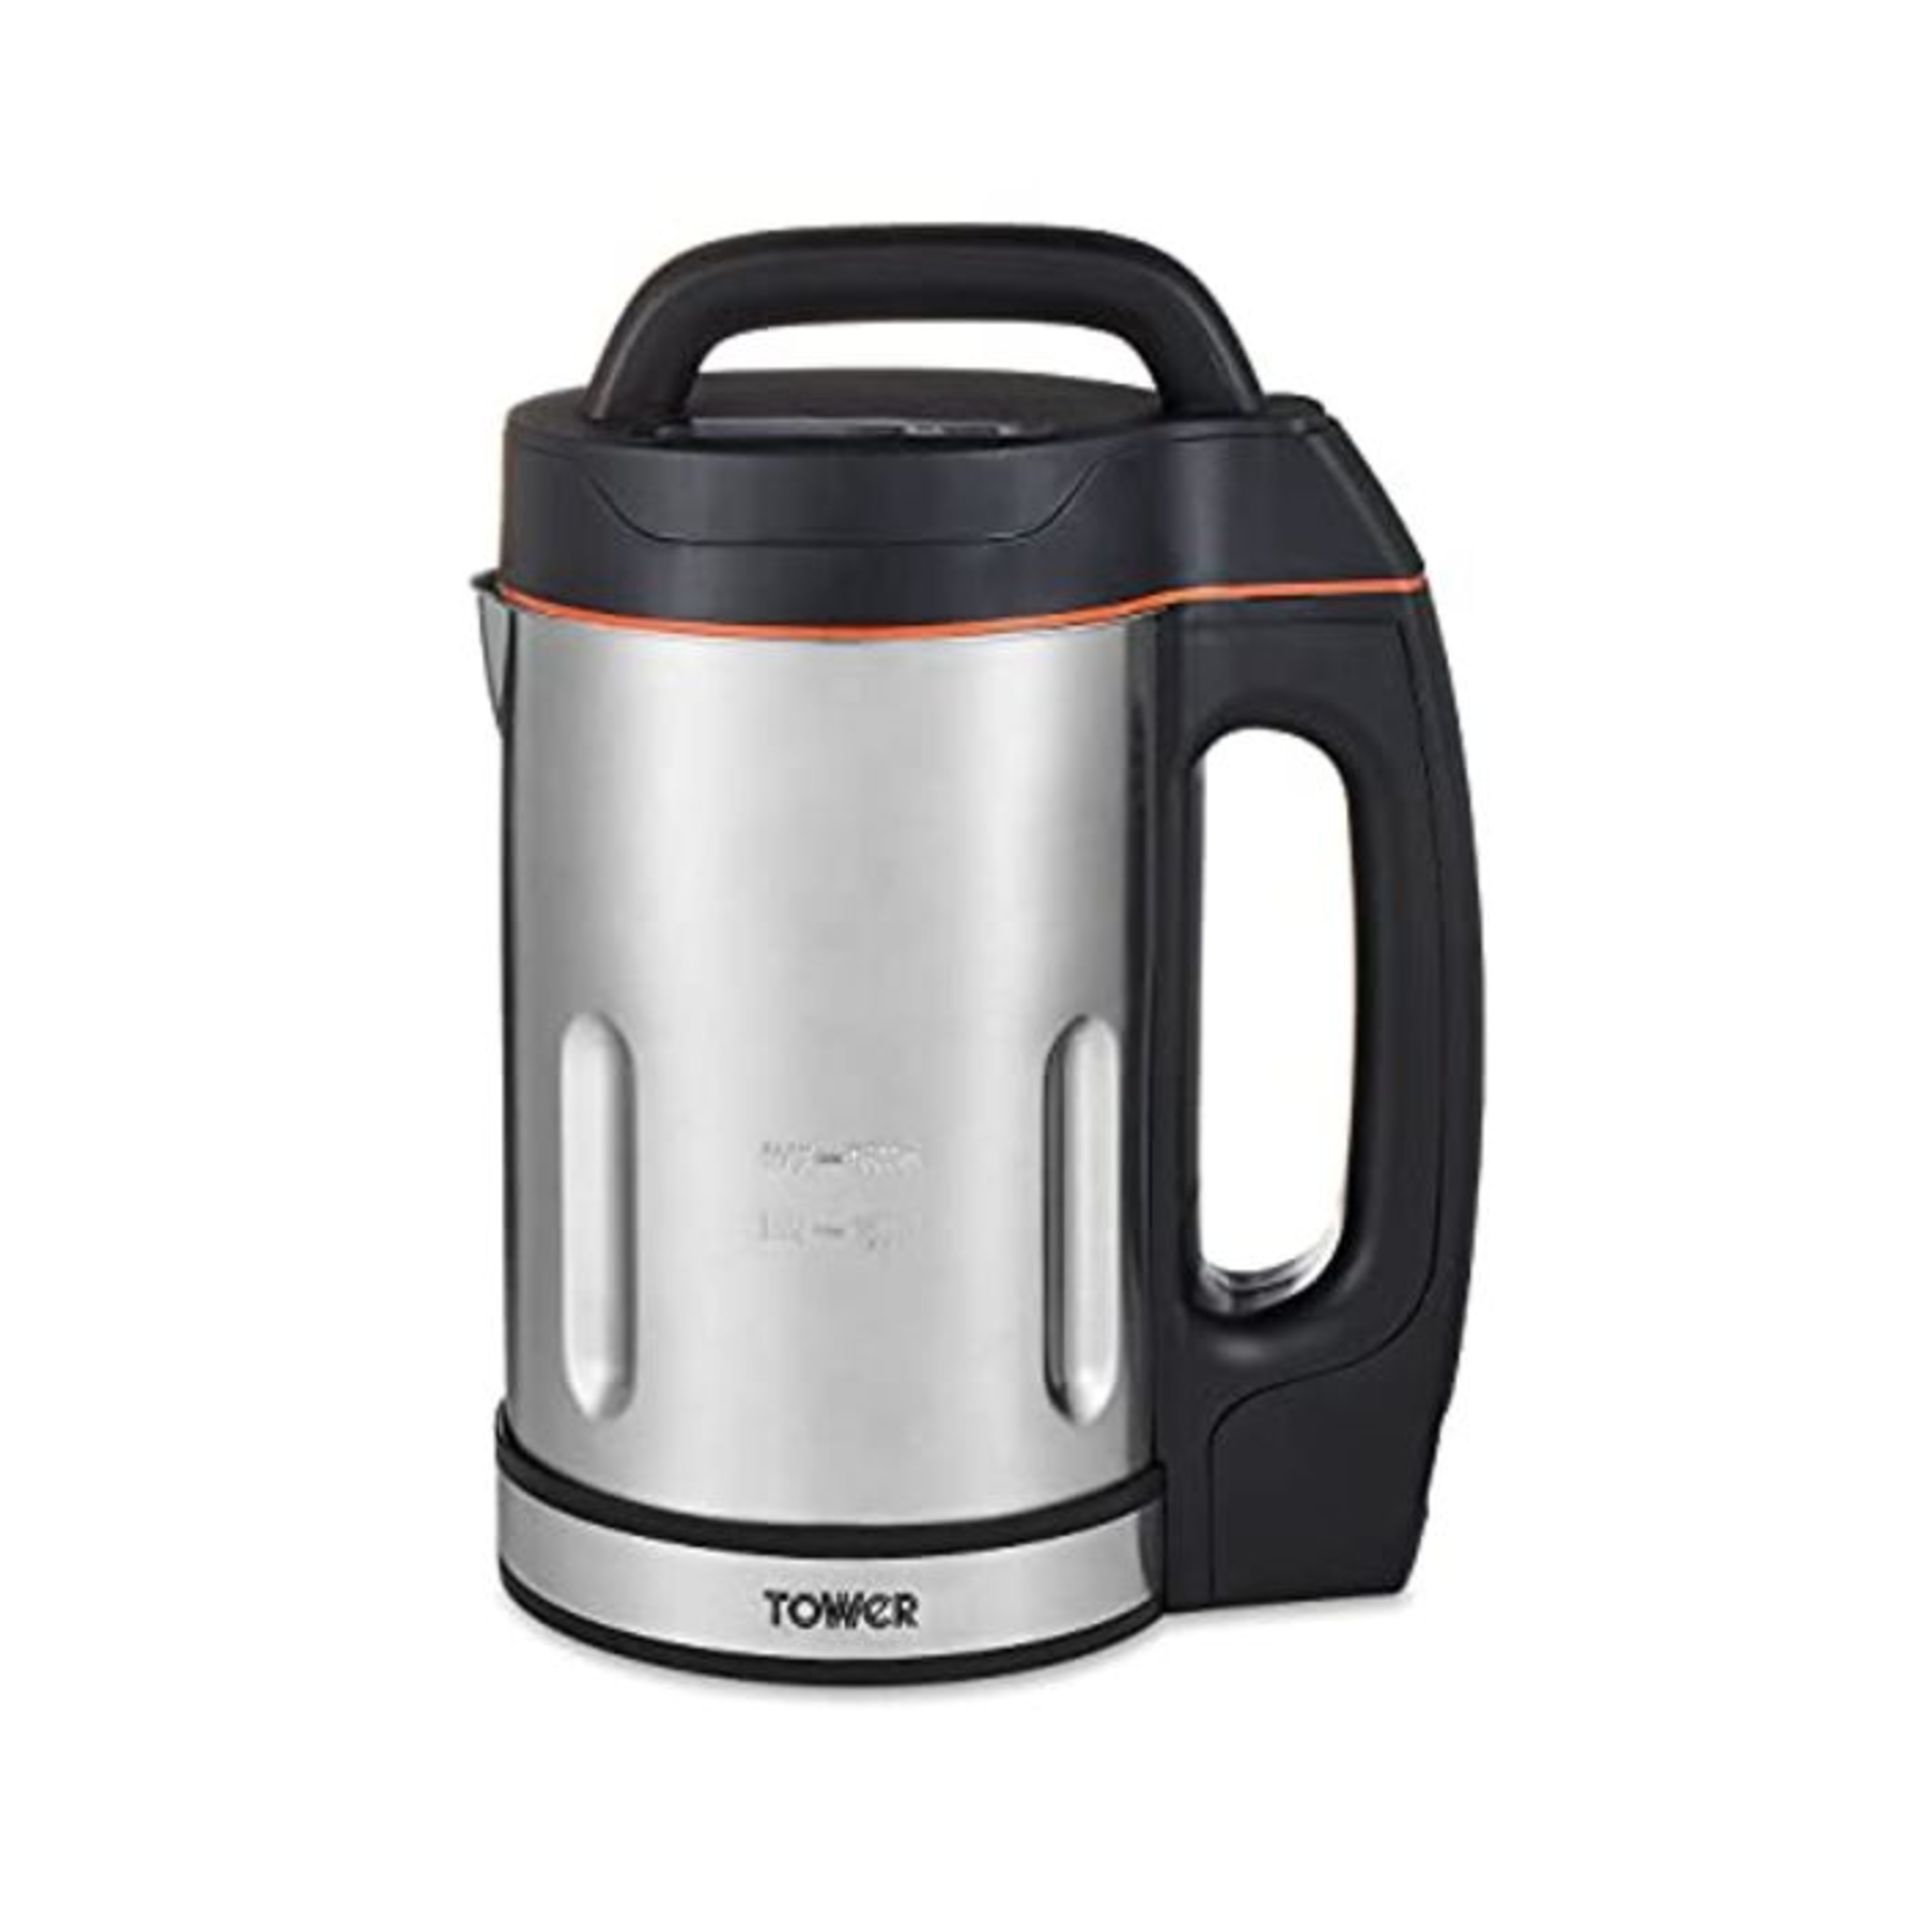 Tower T12031 Soup & Smoothie Maker with Intelligent Control System and Stainless Steel